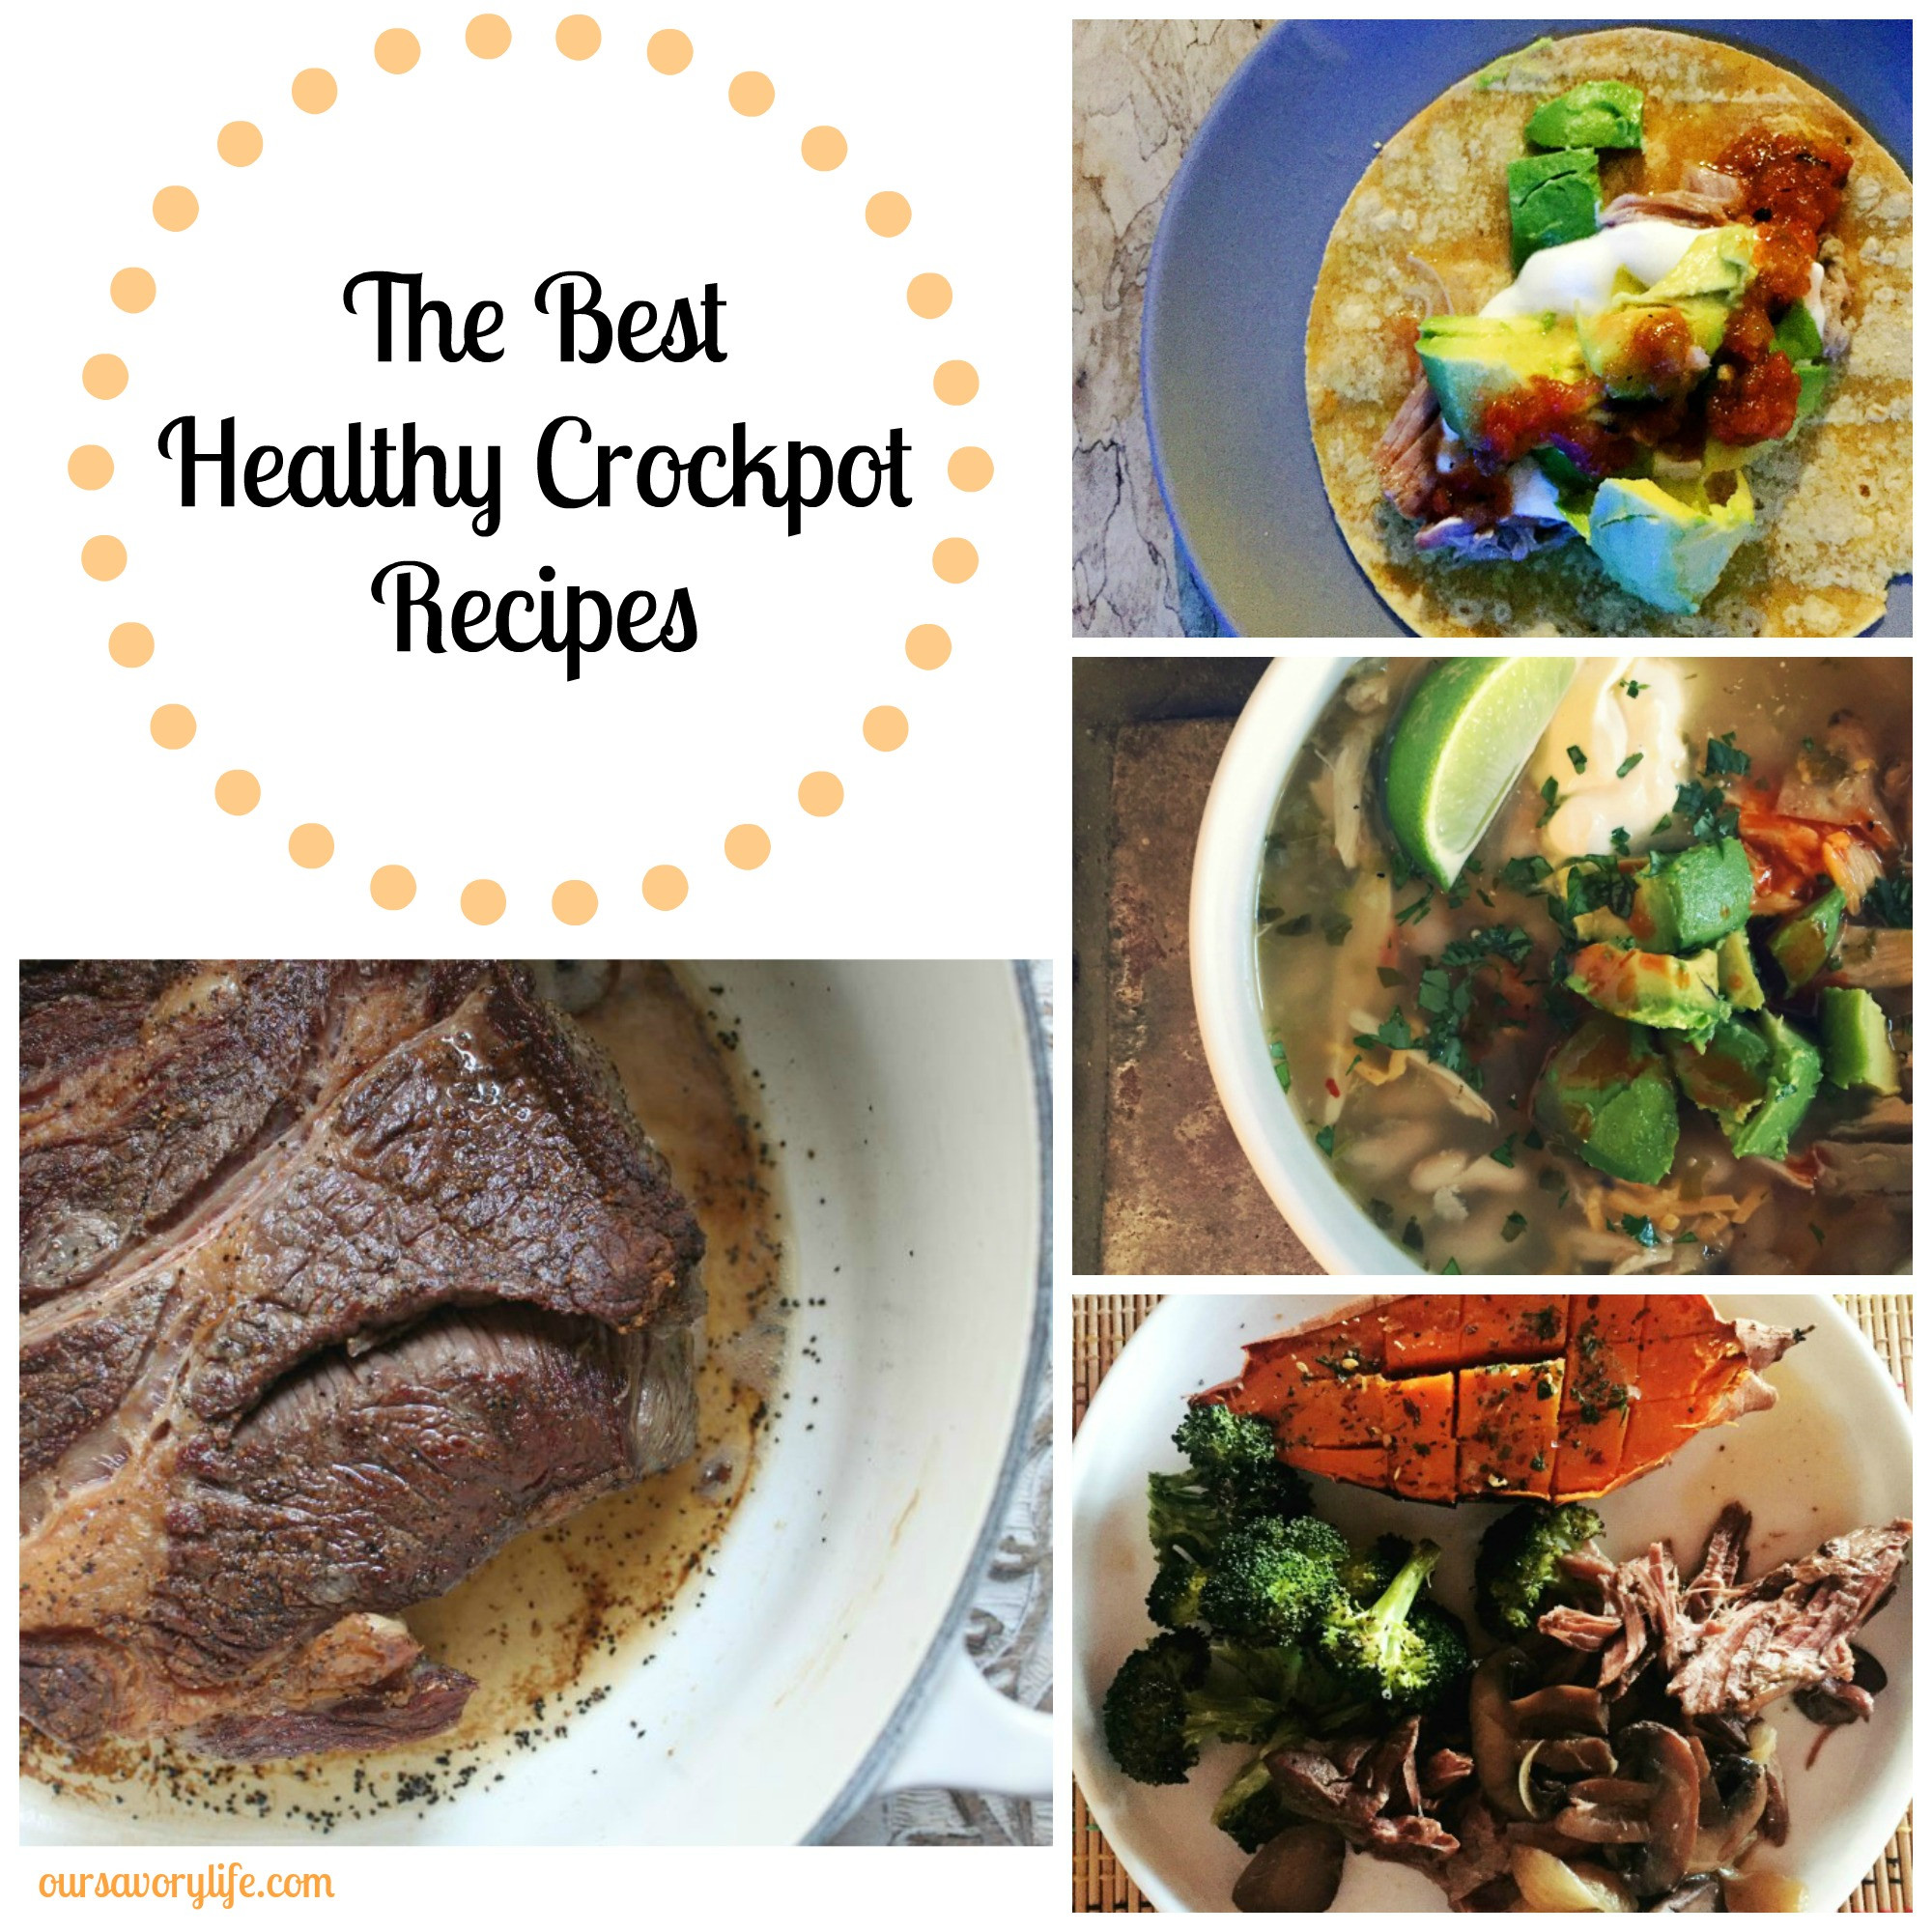 Heart Healthy Crockpot Recipes
 The Best Healthy Crockpot Recipes Our Savory Life